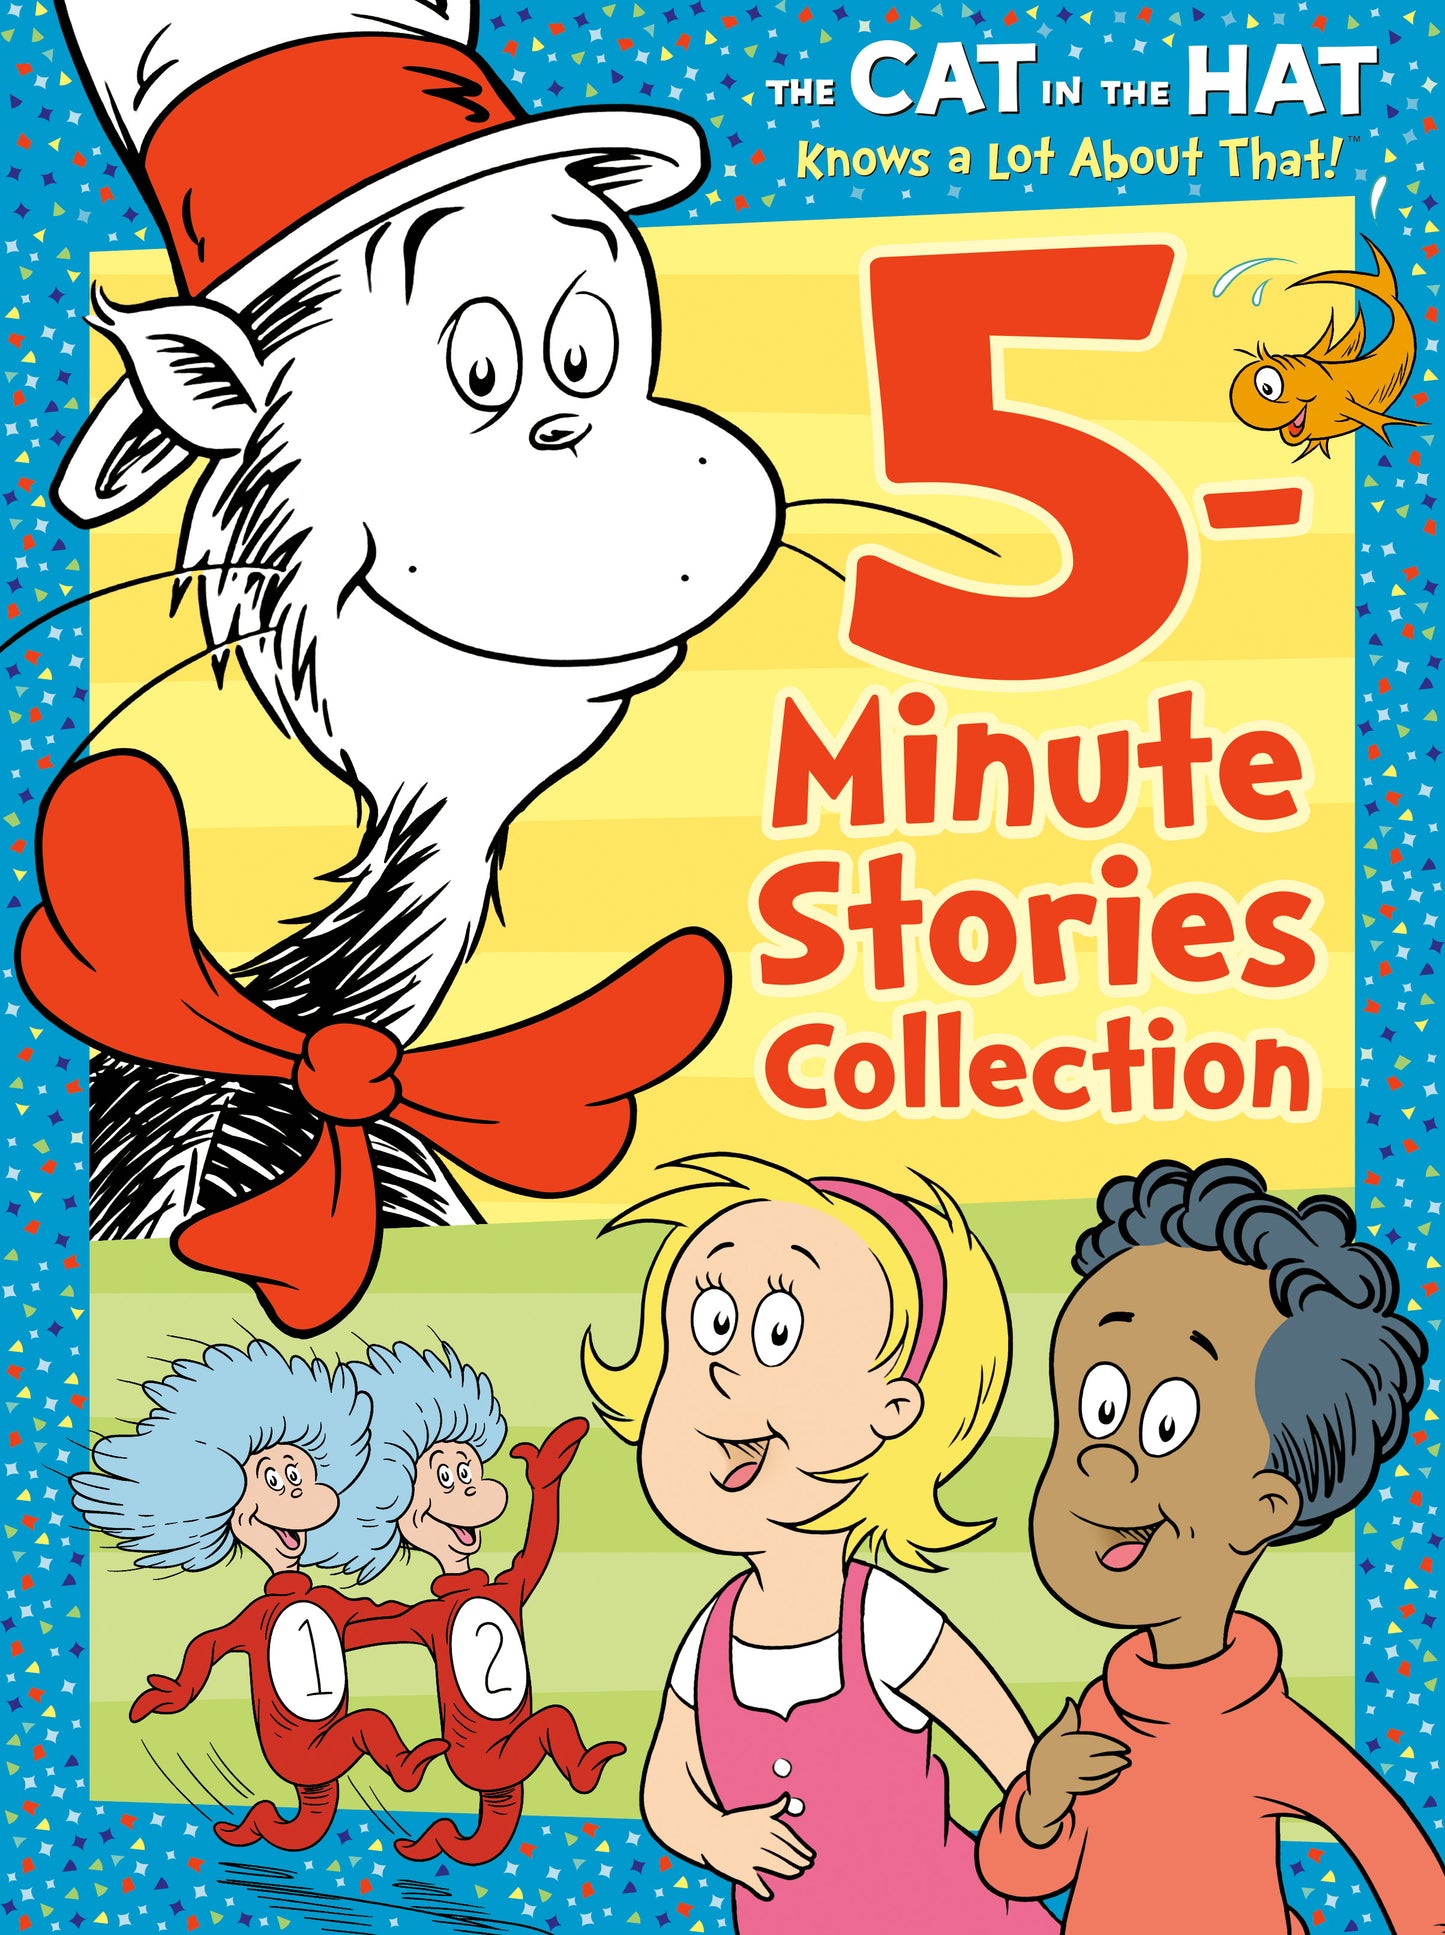 The Cat in the Hat Knows a Lot About That 5-Minute Stories Collection (Dr. Seuss /The Cat in the Hat Knows a Lot About That)